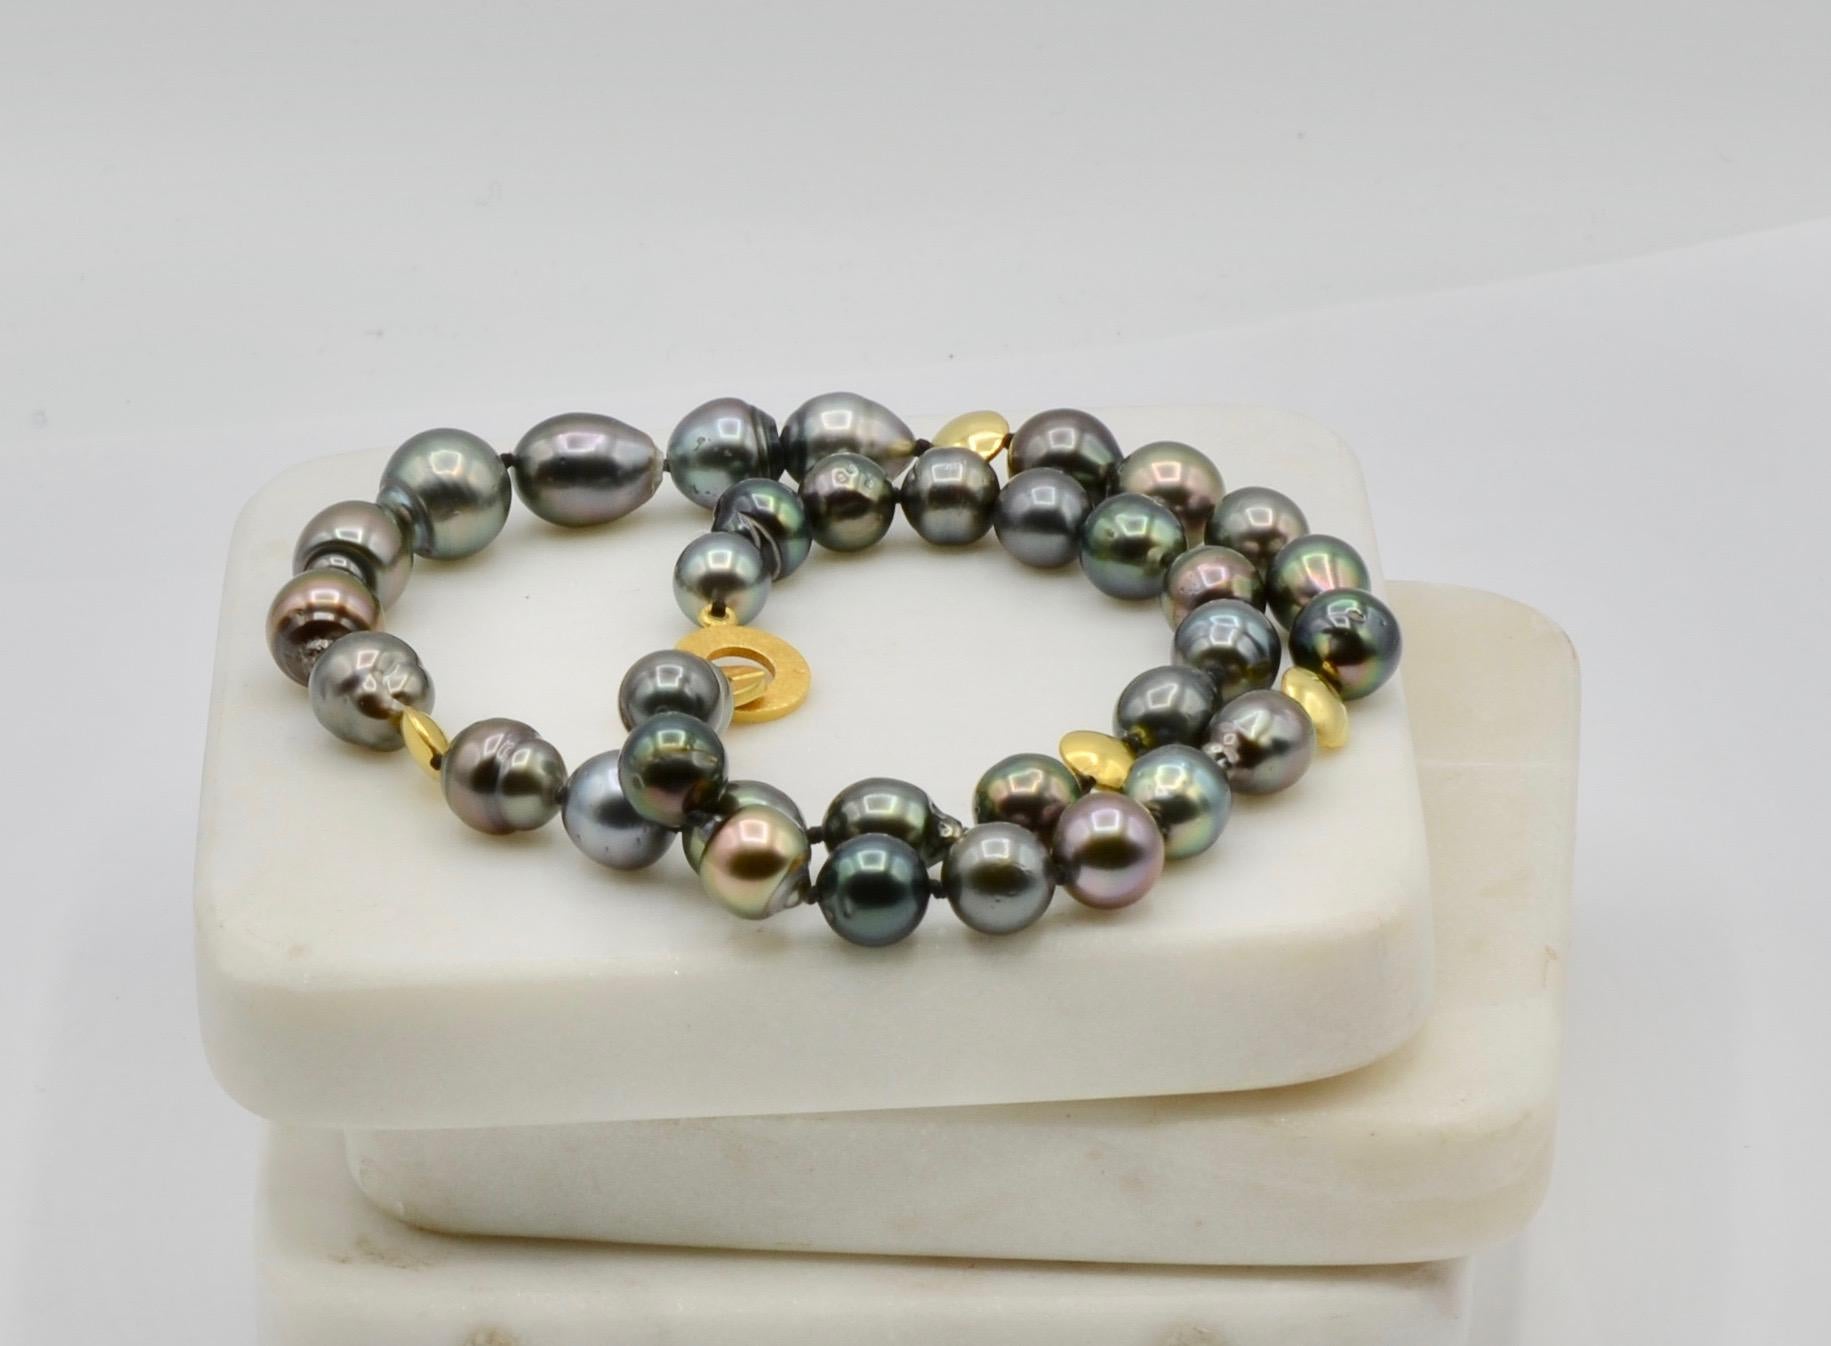 These deep blue Tahitian pearls have a rainbow luster that is mesmerizing. The 18 karat beads and clasp add a beautiful accent of color. The 18 inch length is the perfect length. 